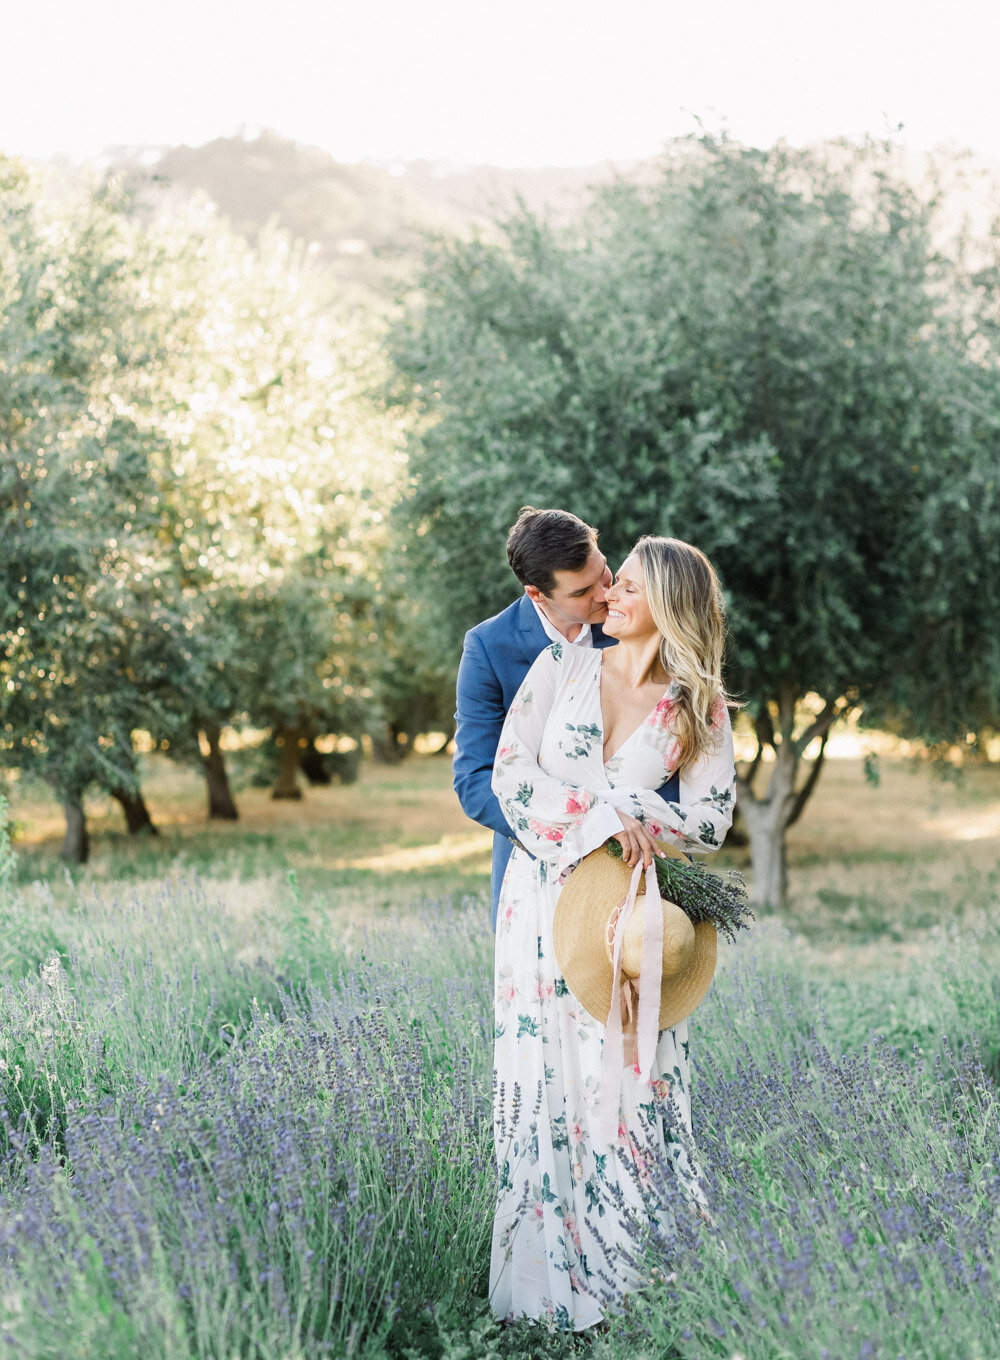 Olive Grove Engagement Photo  in Napa Valley